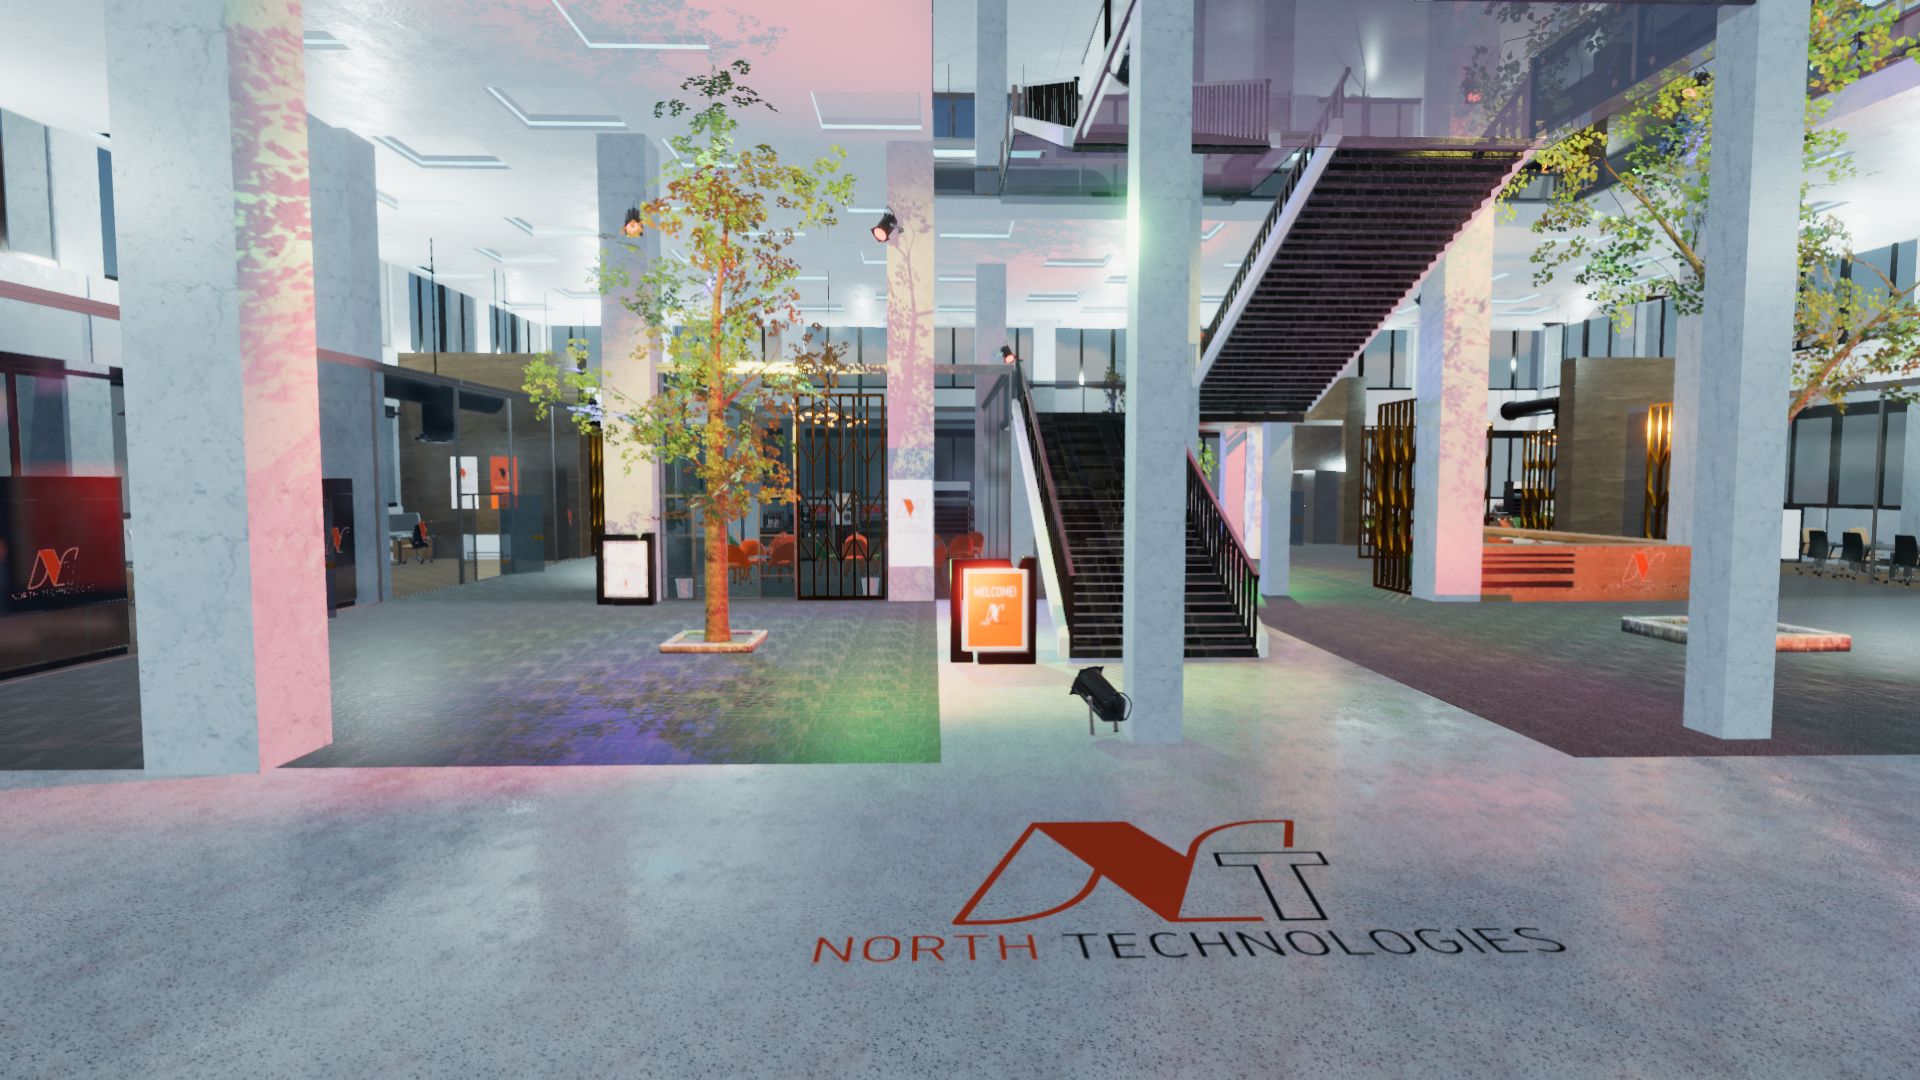 An image showing North Technologies asset pack, created with Unity Engine.